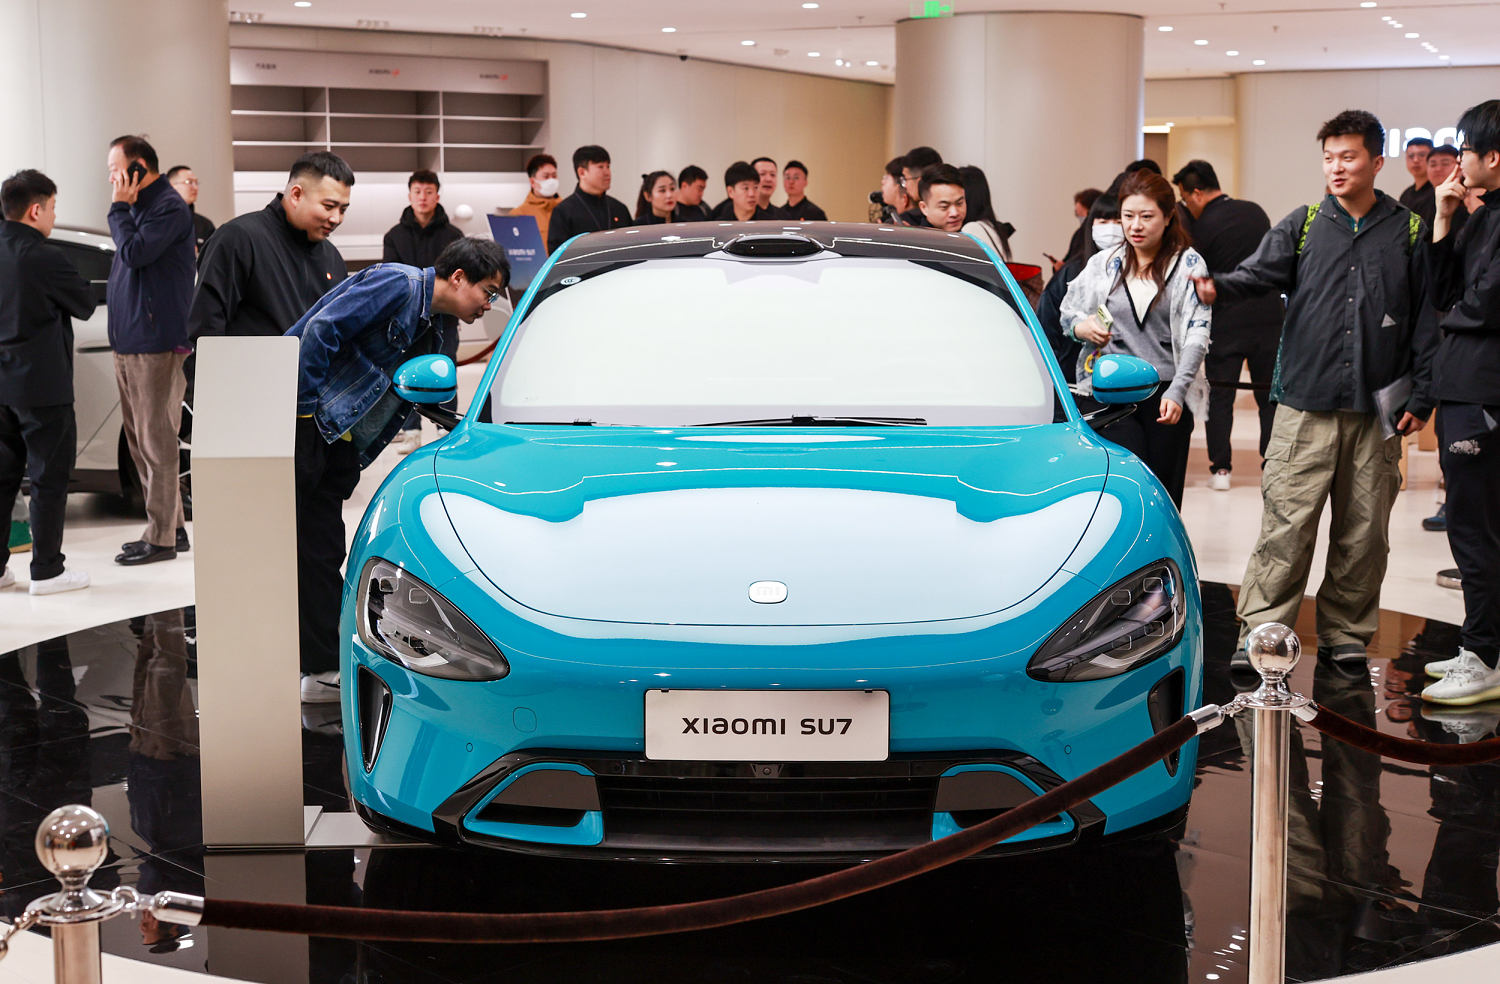 China's latest EV is a 'connected' car from smartphone maker Xiaomi